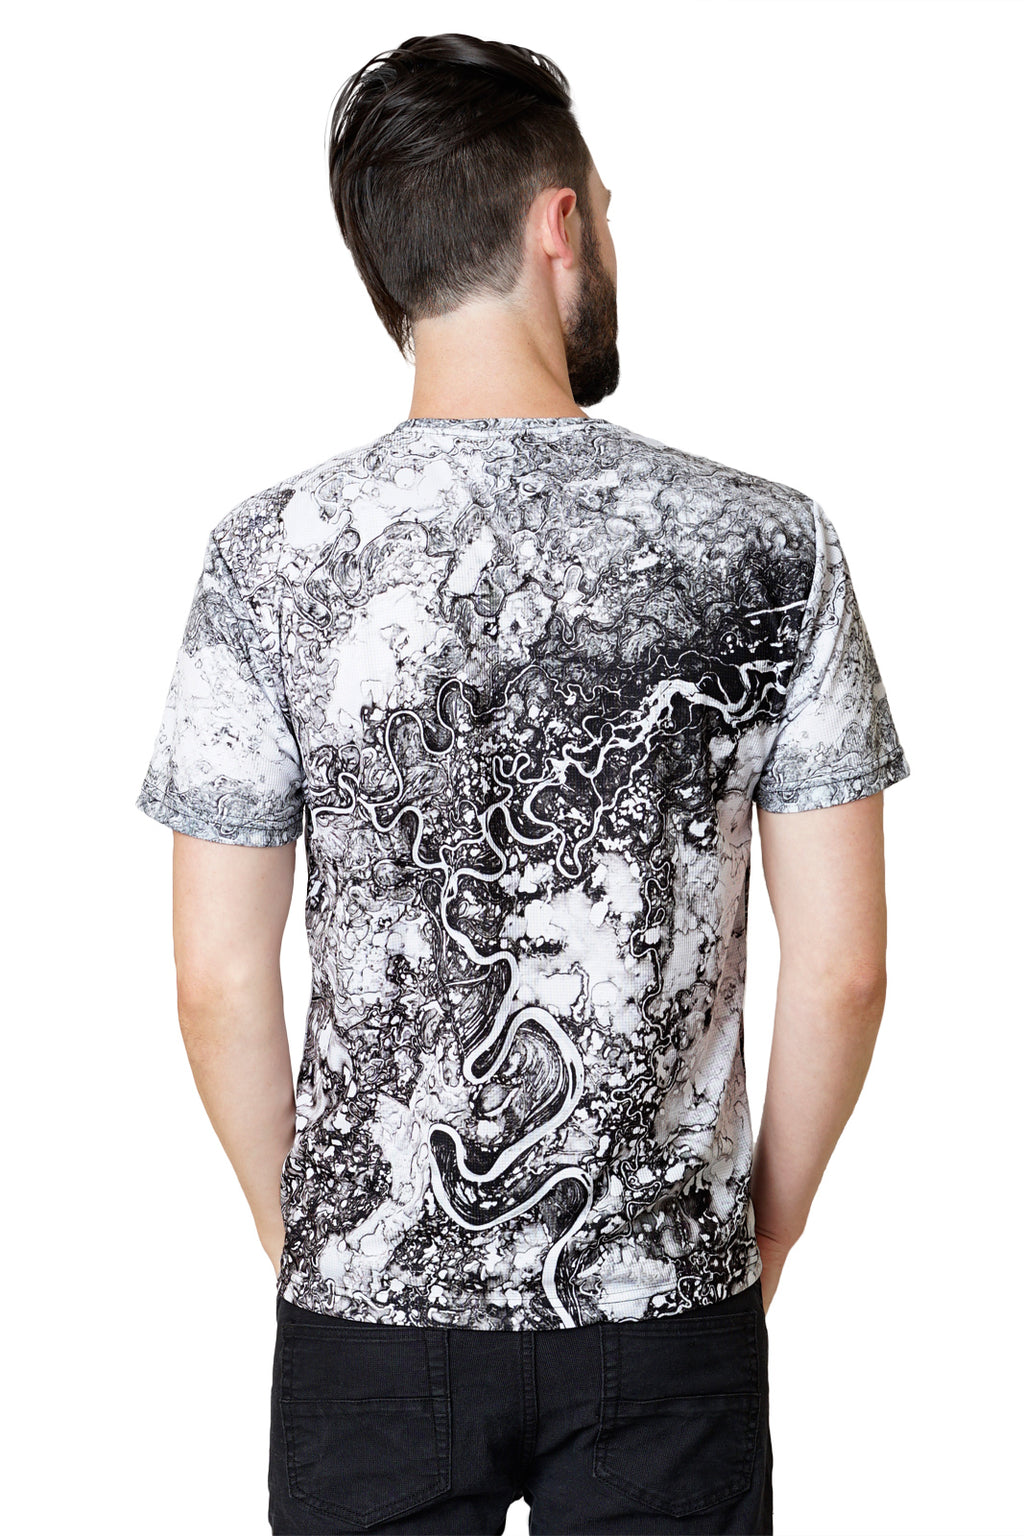 Mens Shortsleeve T-shirt-Nature Inspired Clothing-Earth Images Clothing-Mayn River-Back View